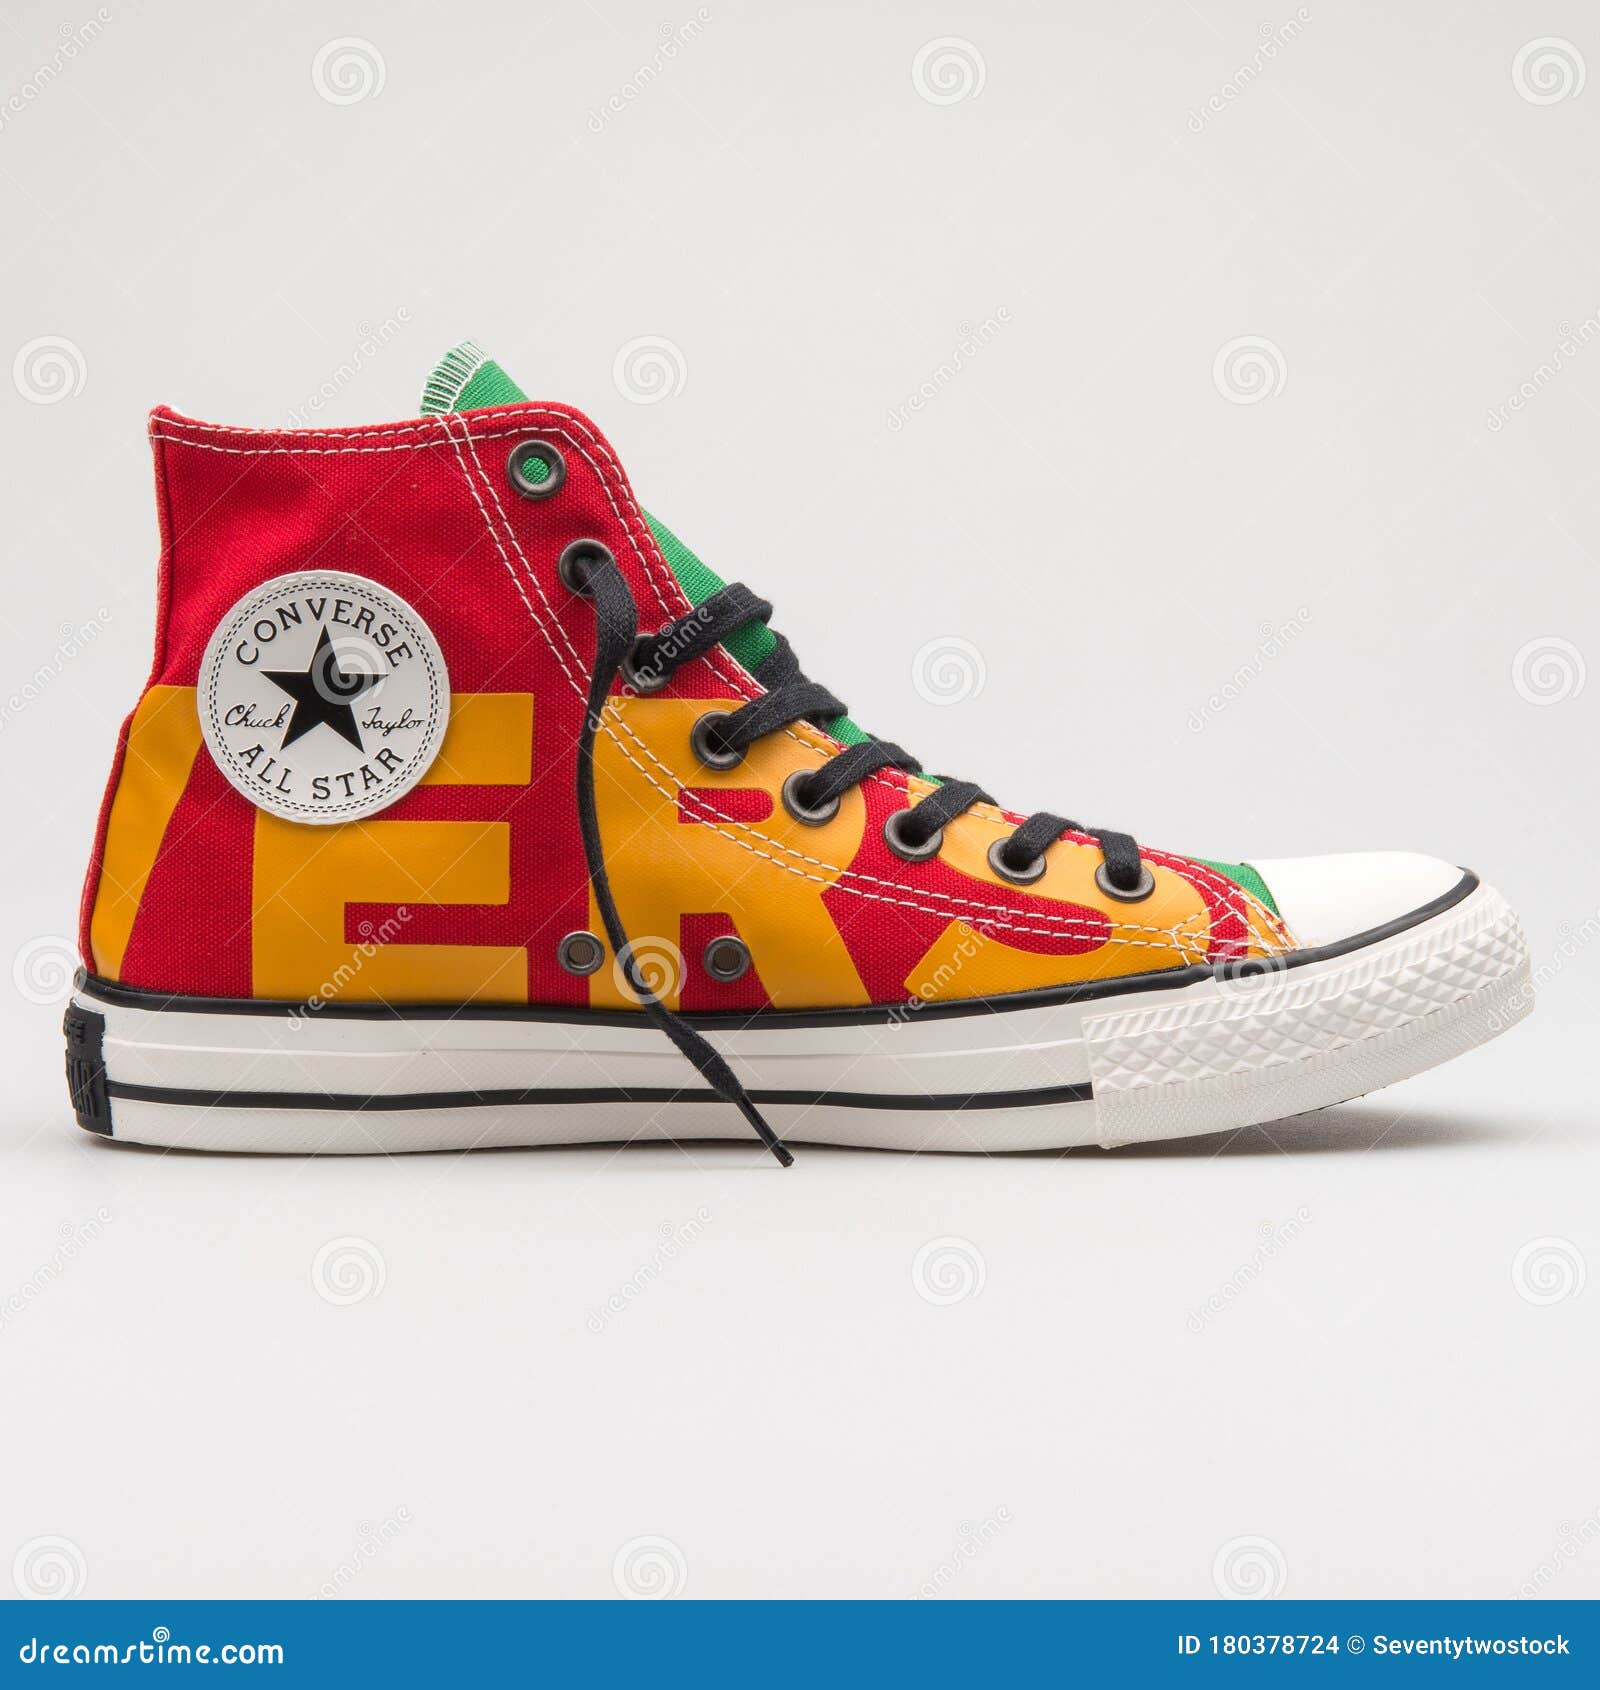 Converse Chuck Taylor All Star High Red, Yellow and Green Stock Image - Image of fashion, shoe: 180378724